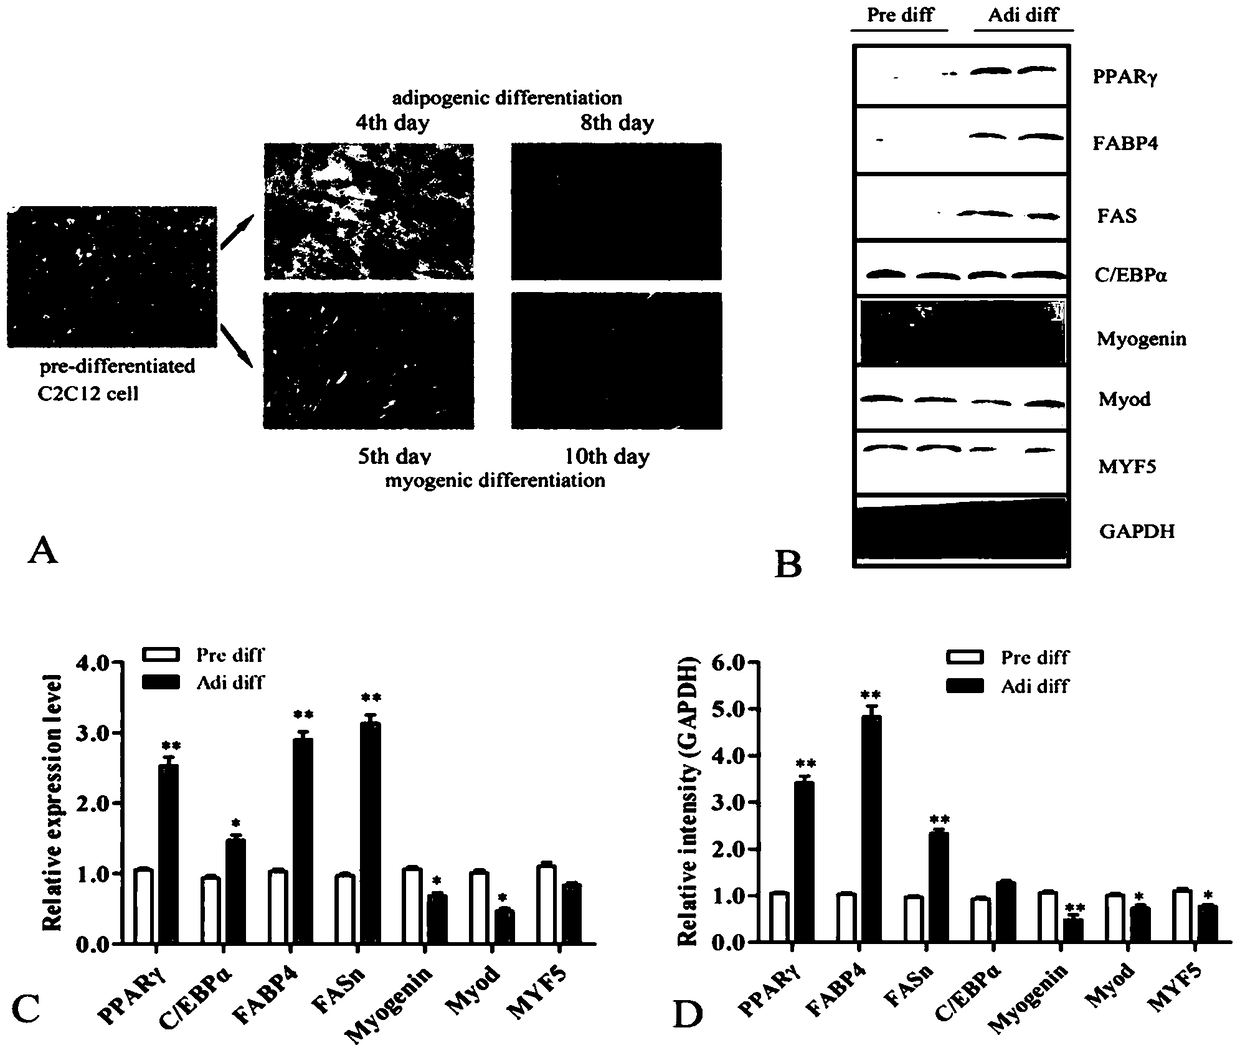 Use of miRNA-199a as an agent to inhibit adipogenic differentiation of myoblasts